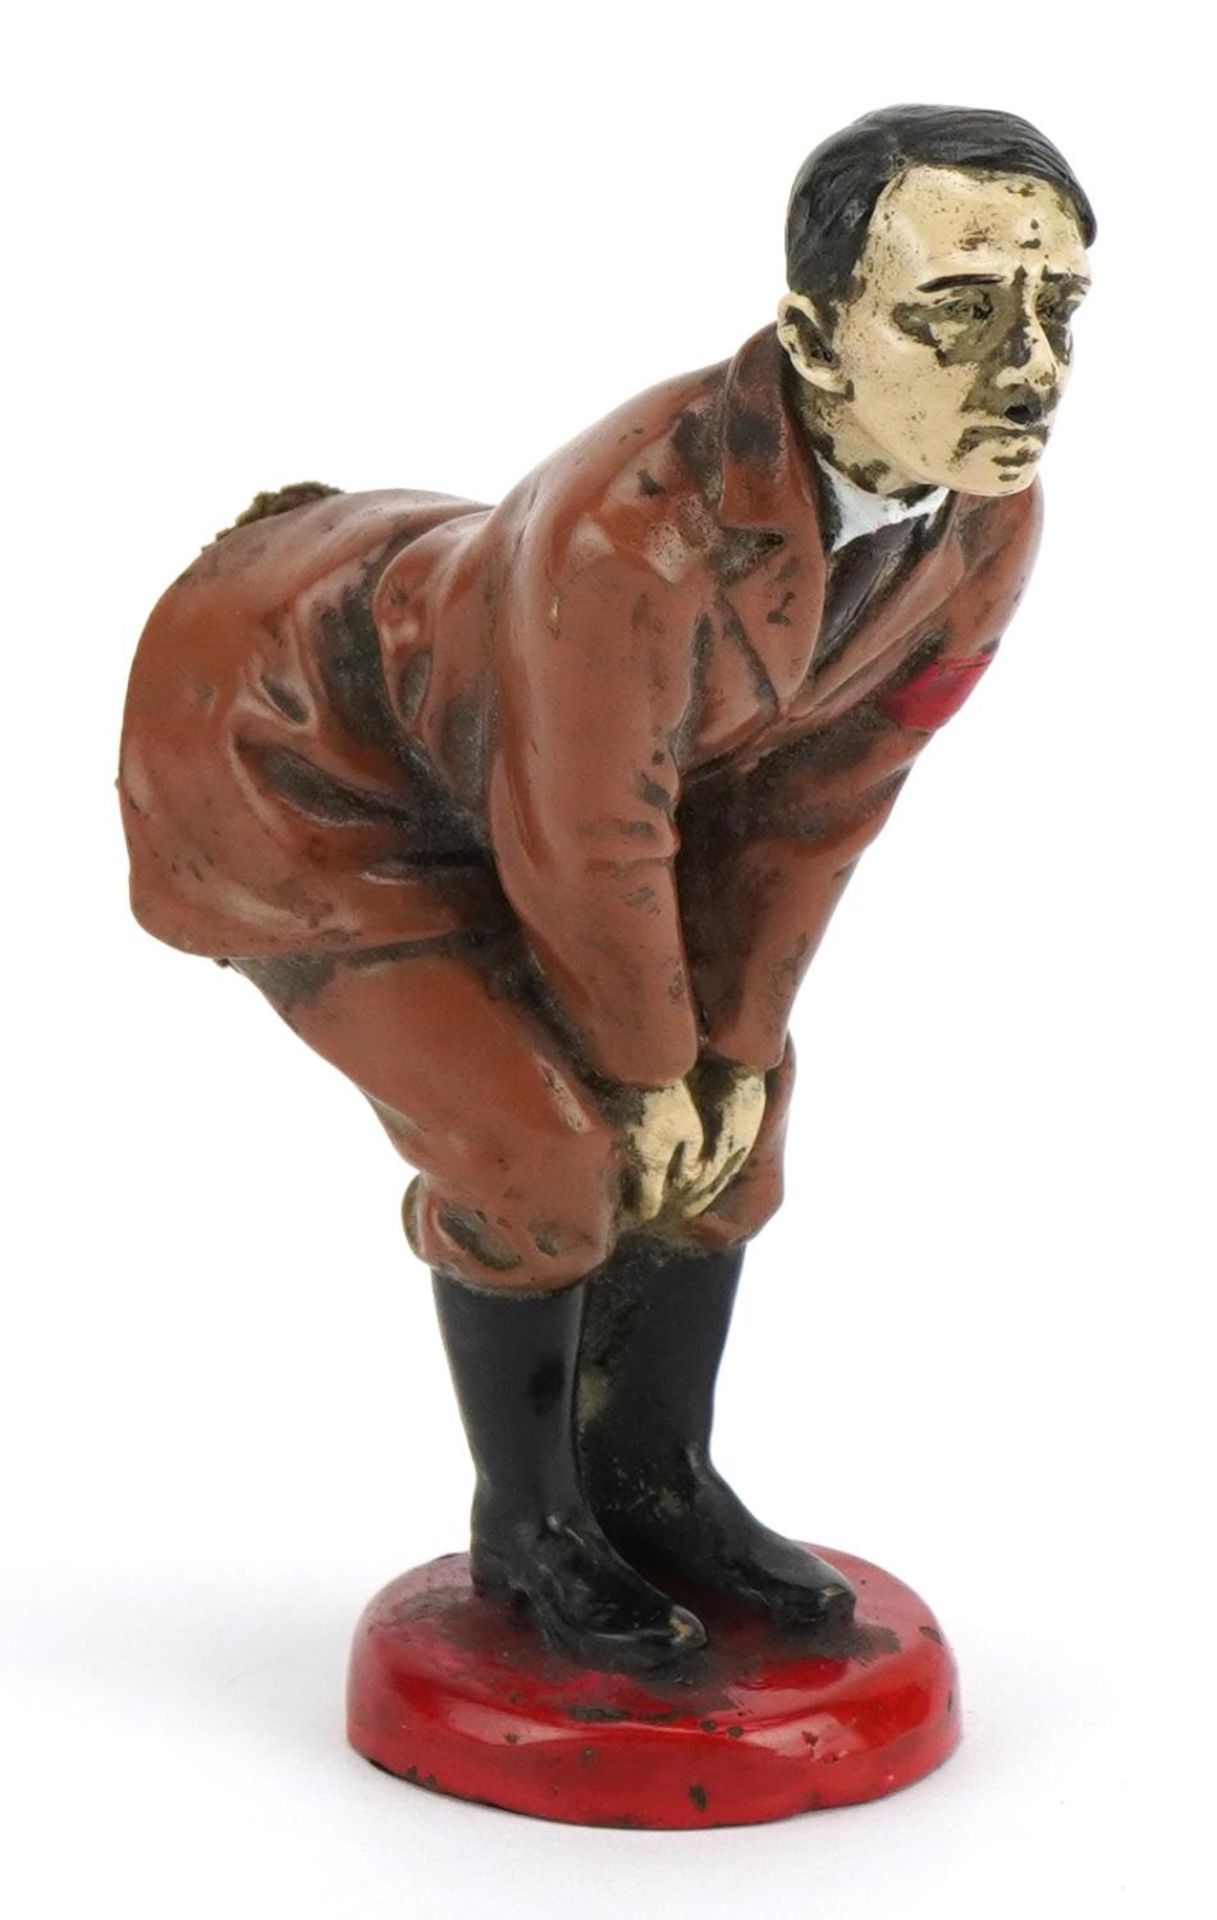 Military interest pin cushion in the form of Adolf Hitler, 12cm high